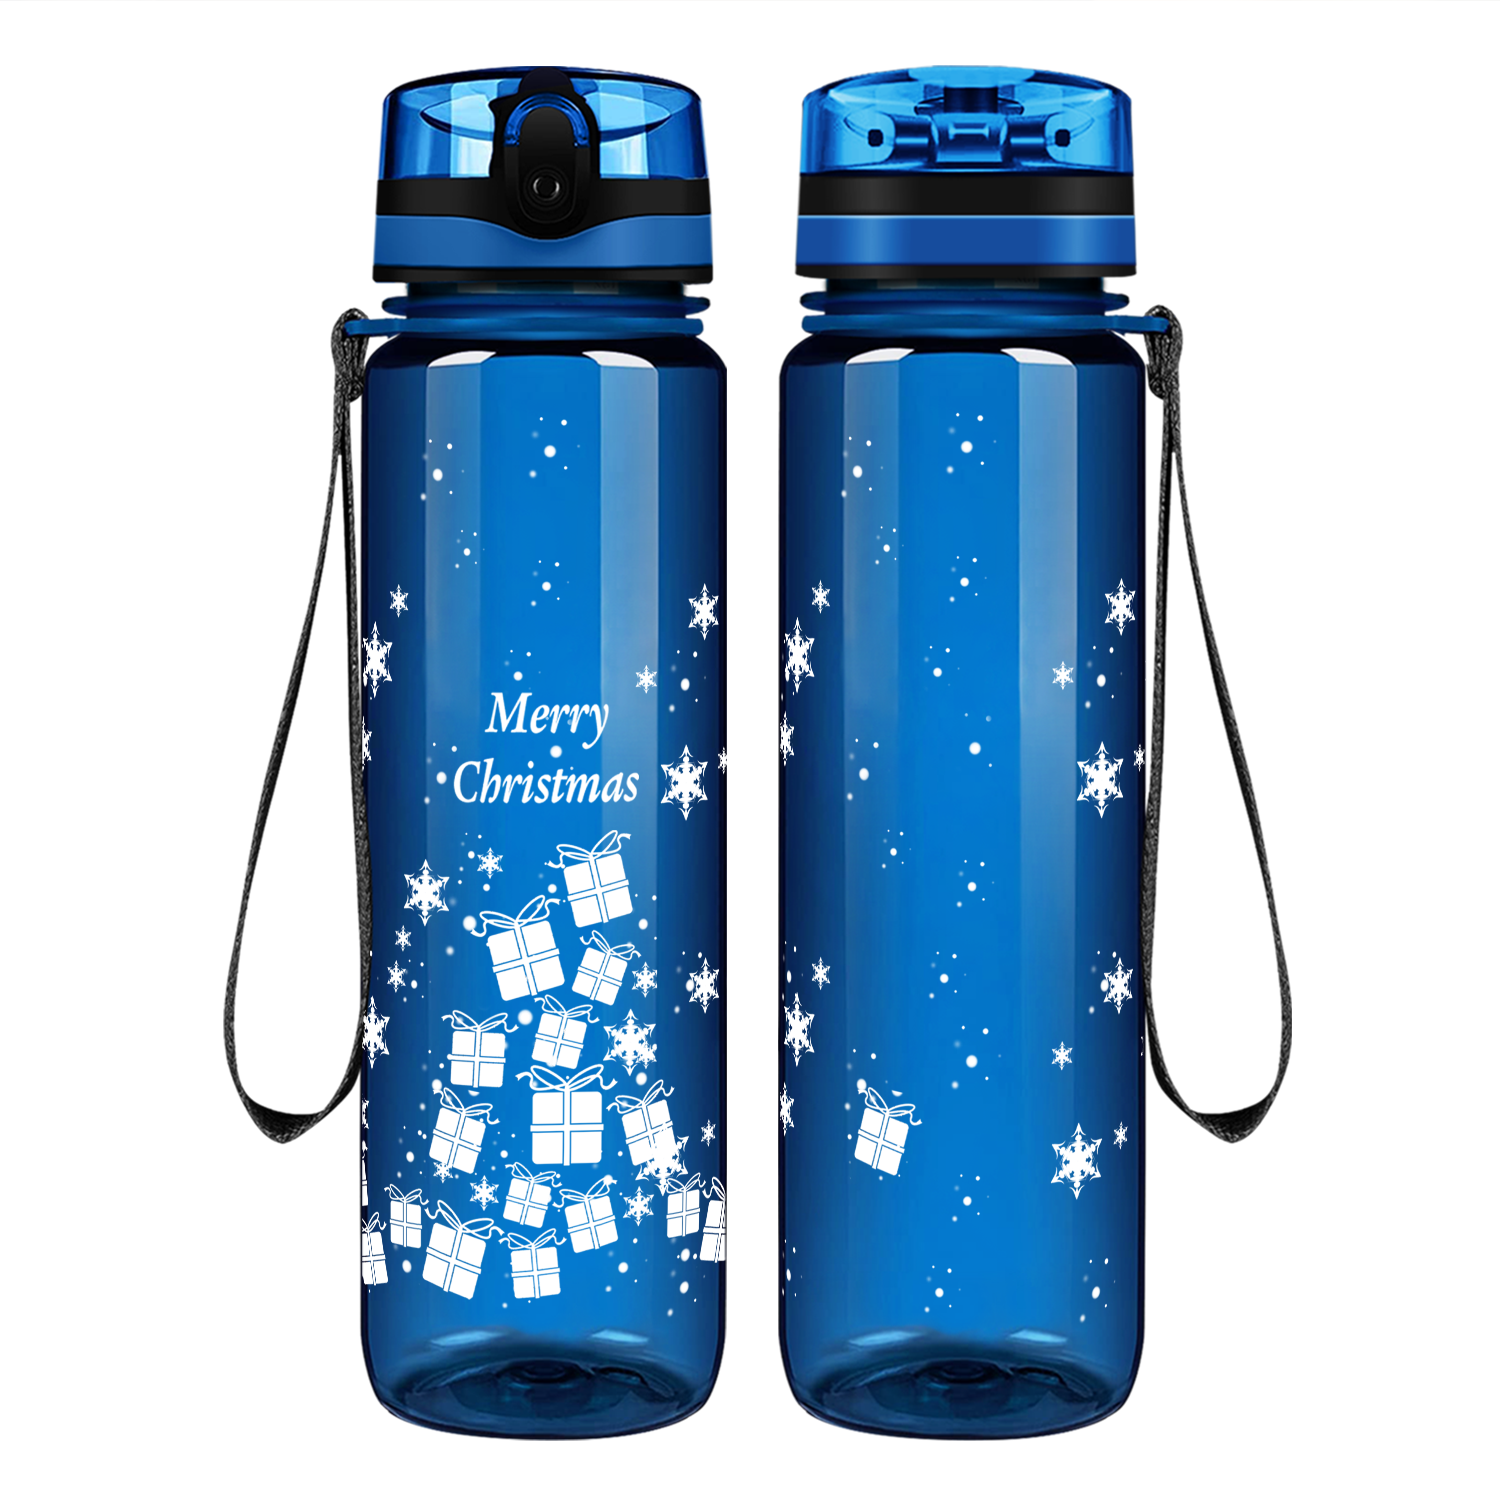 Merry Christmas with Presents Motivational Tracking Water Bottle